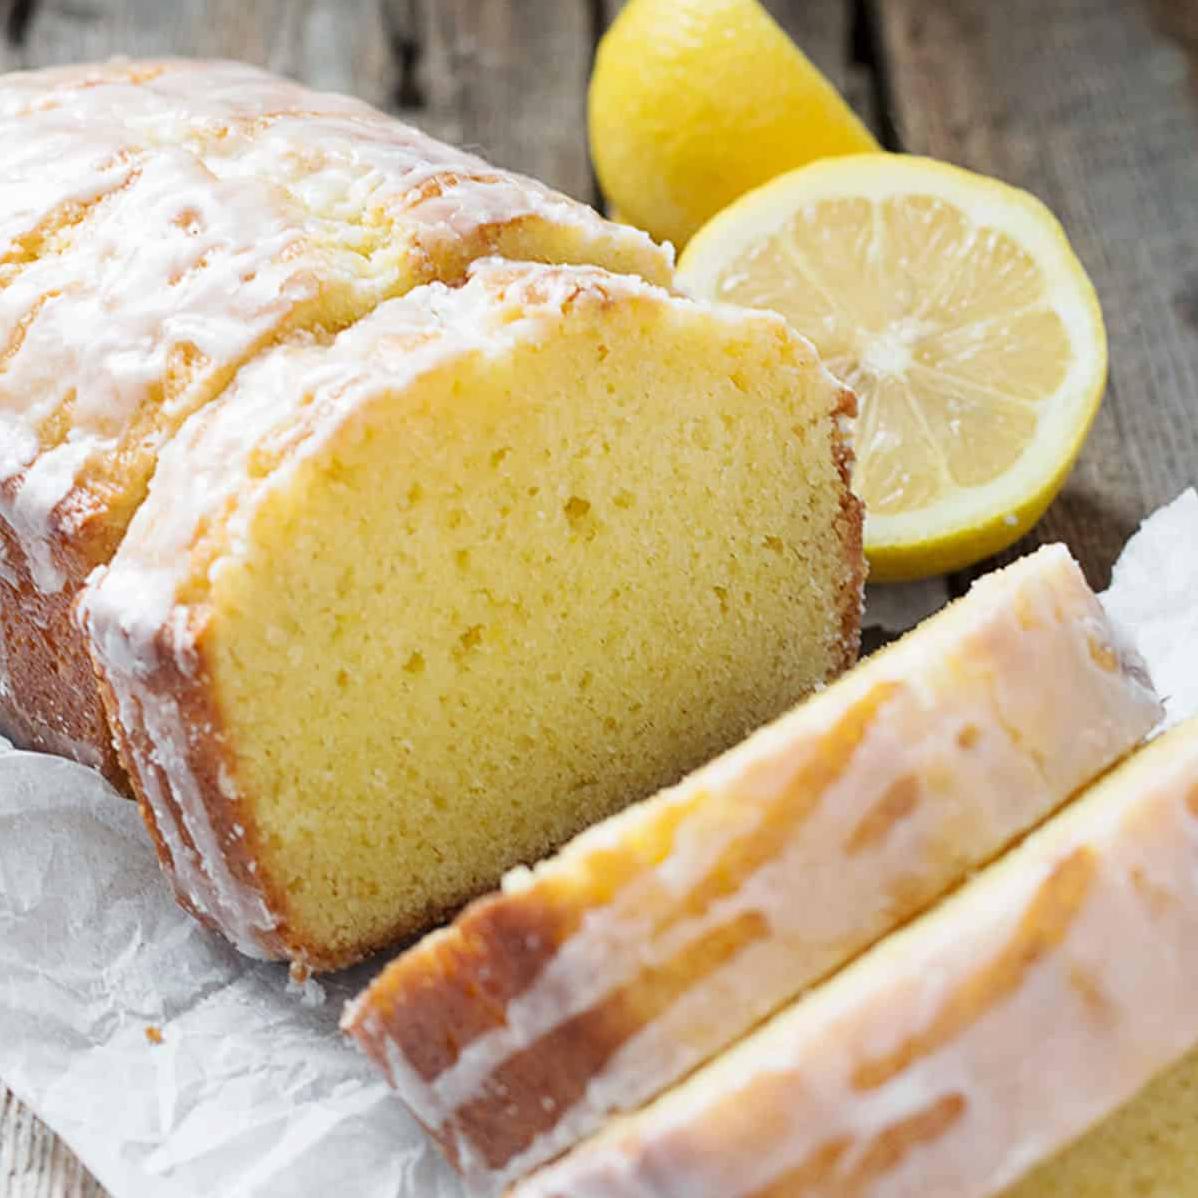  Tangy, sweet, moist, and buttery- all in one slice of our lemon pound cake.